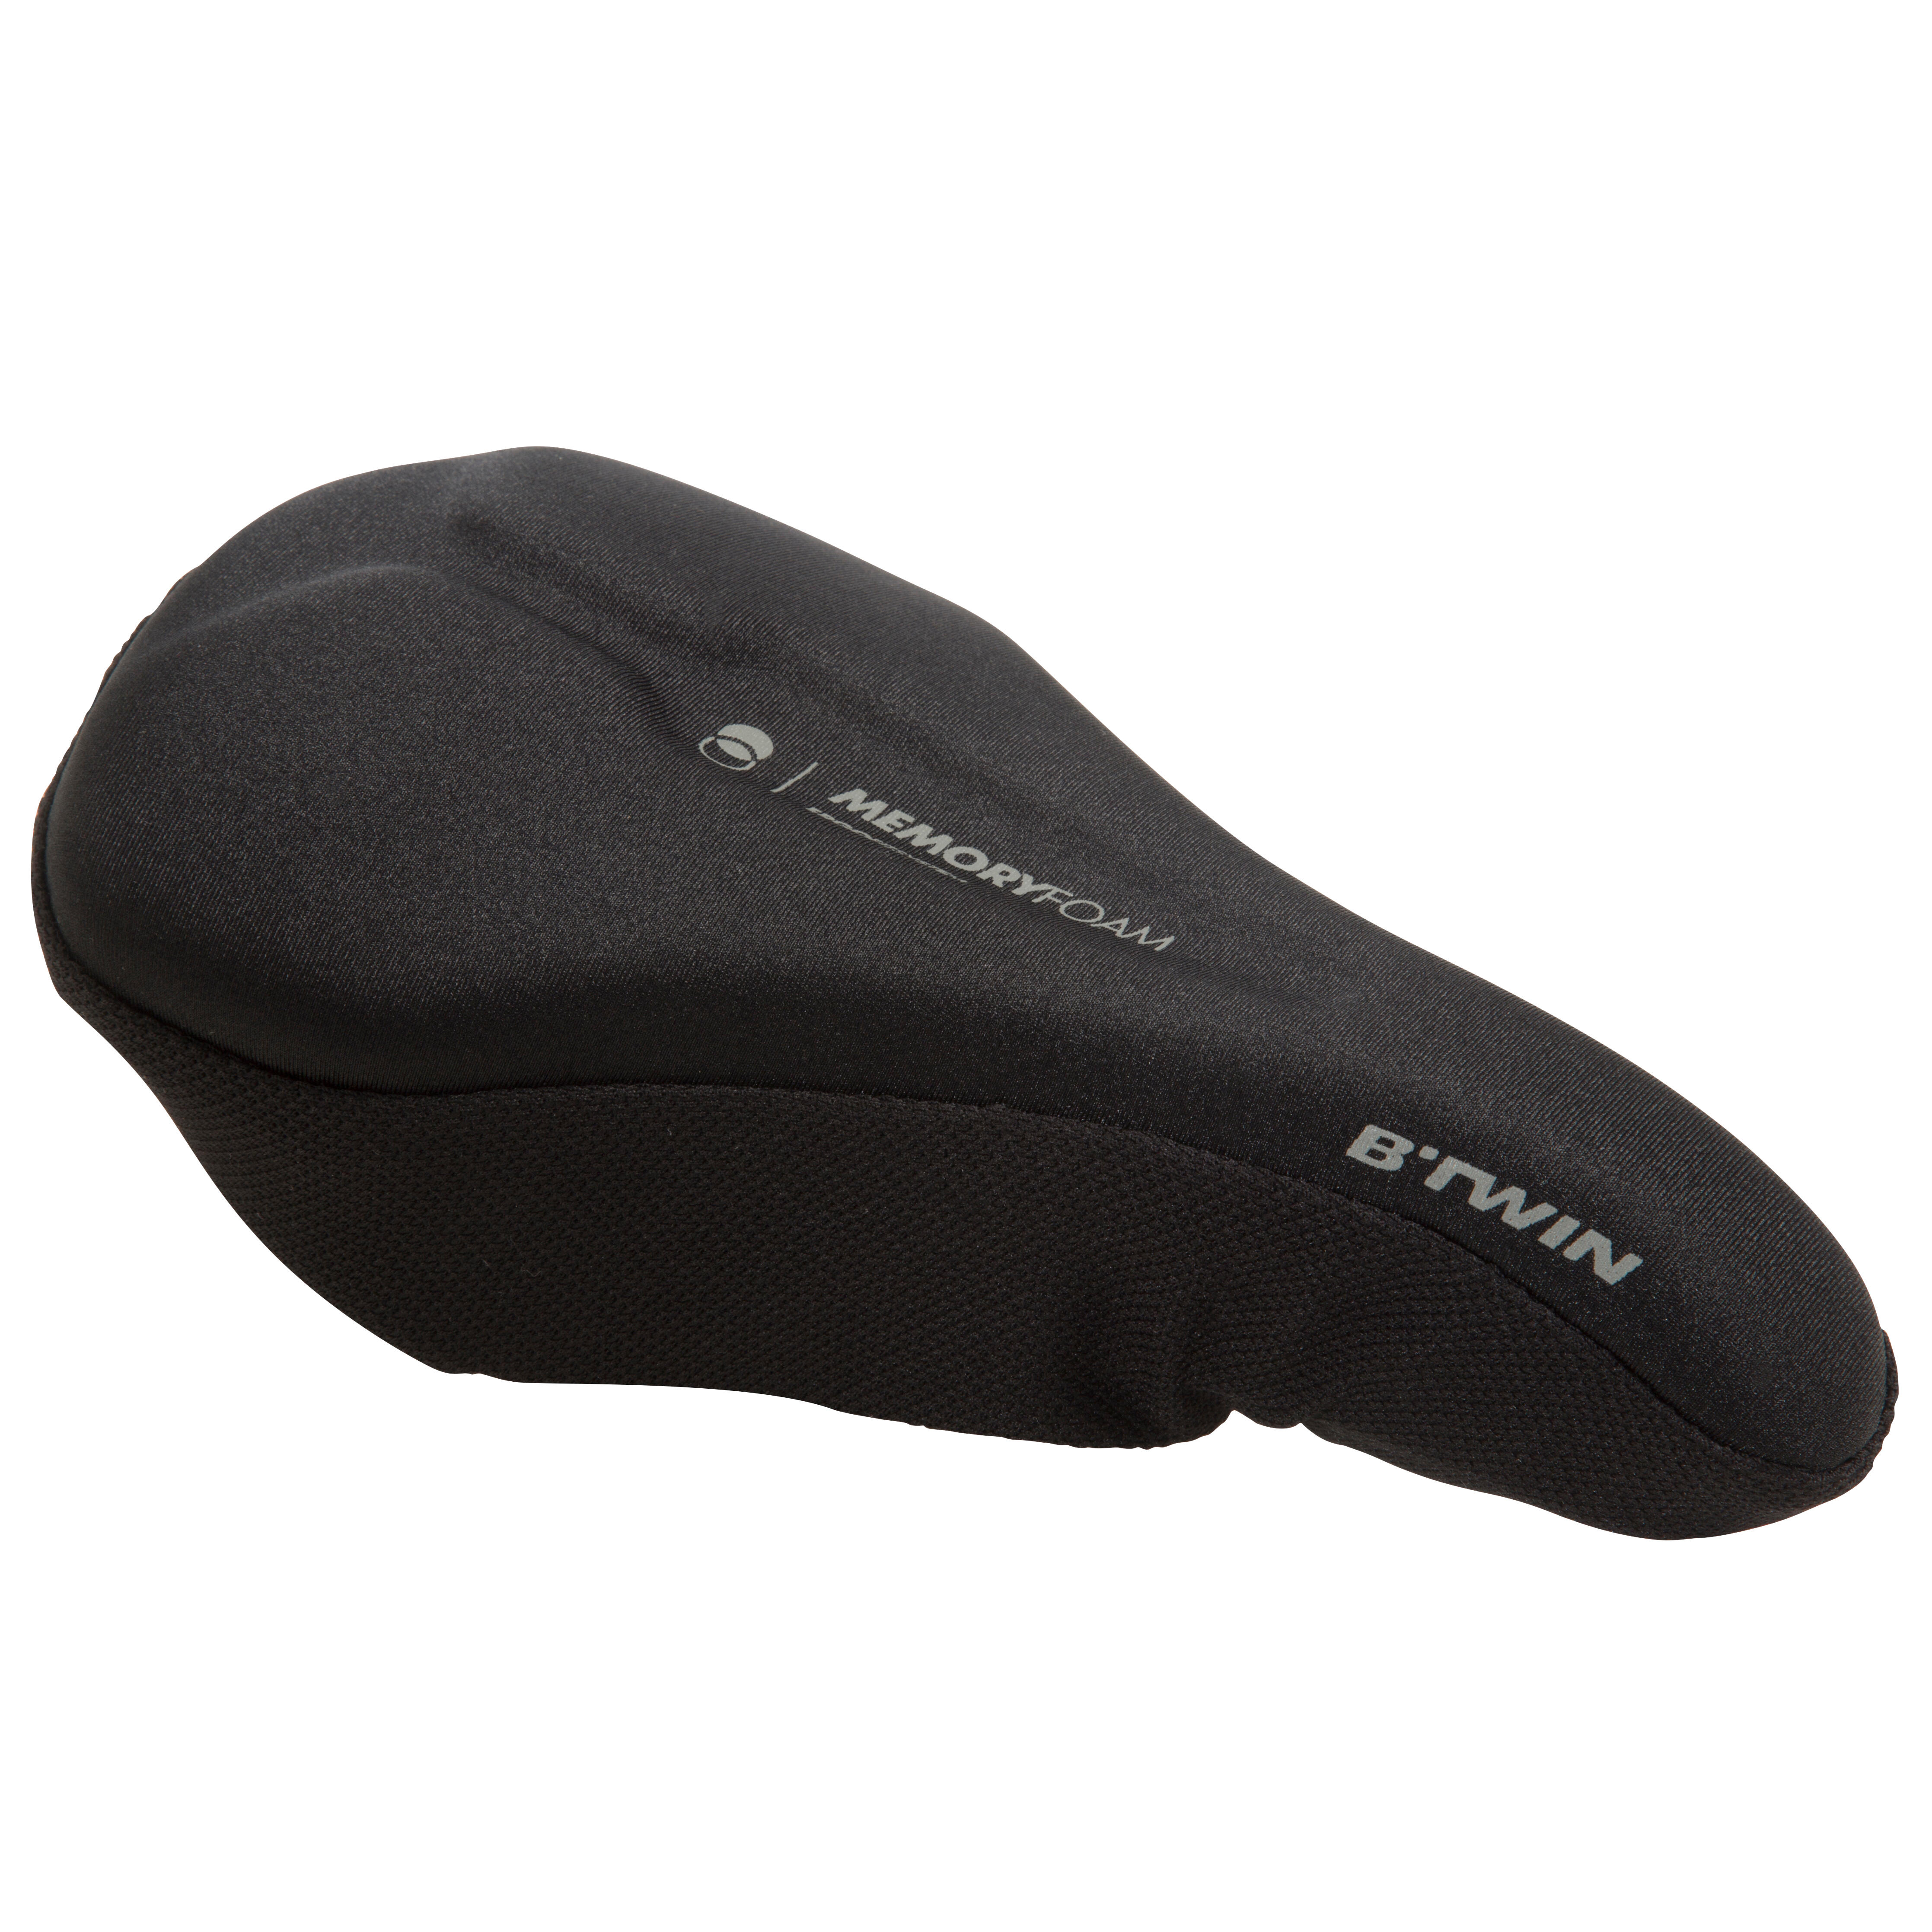 decathlon cycle seat cover